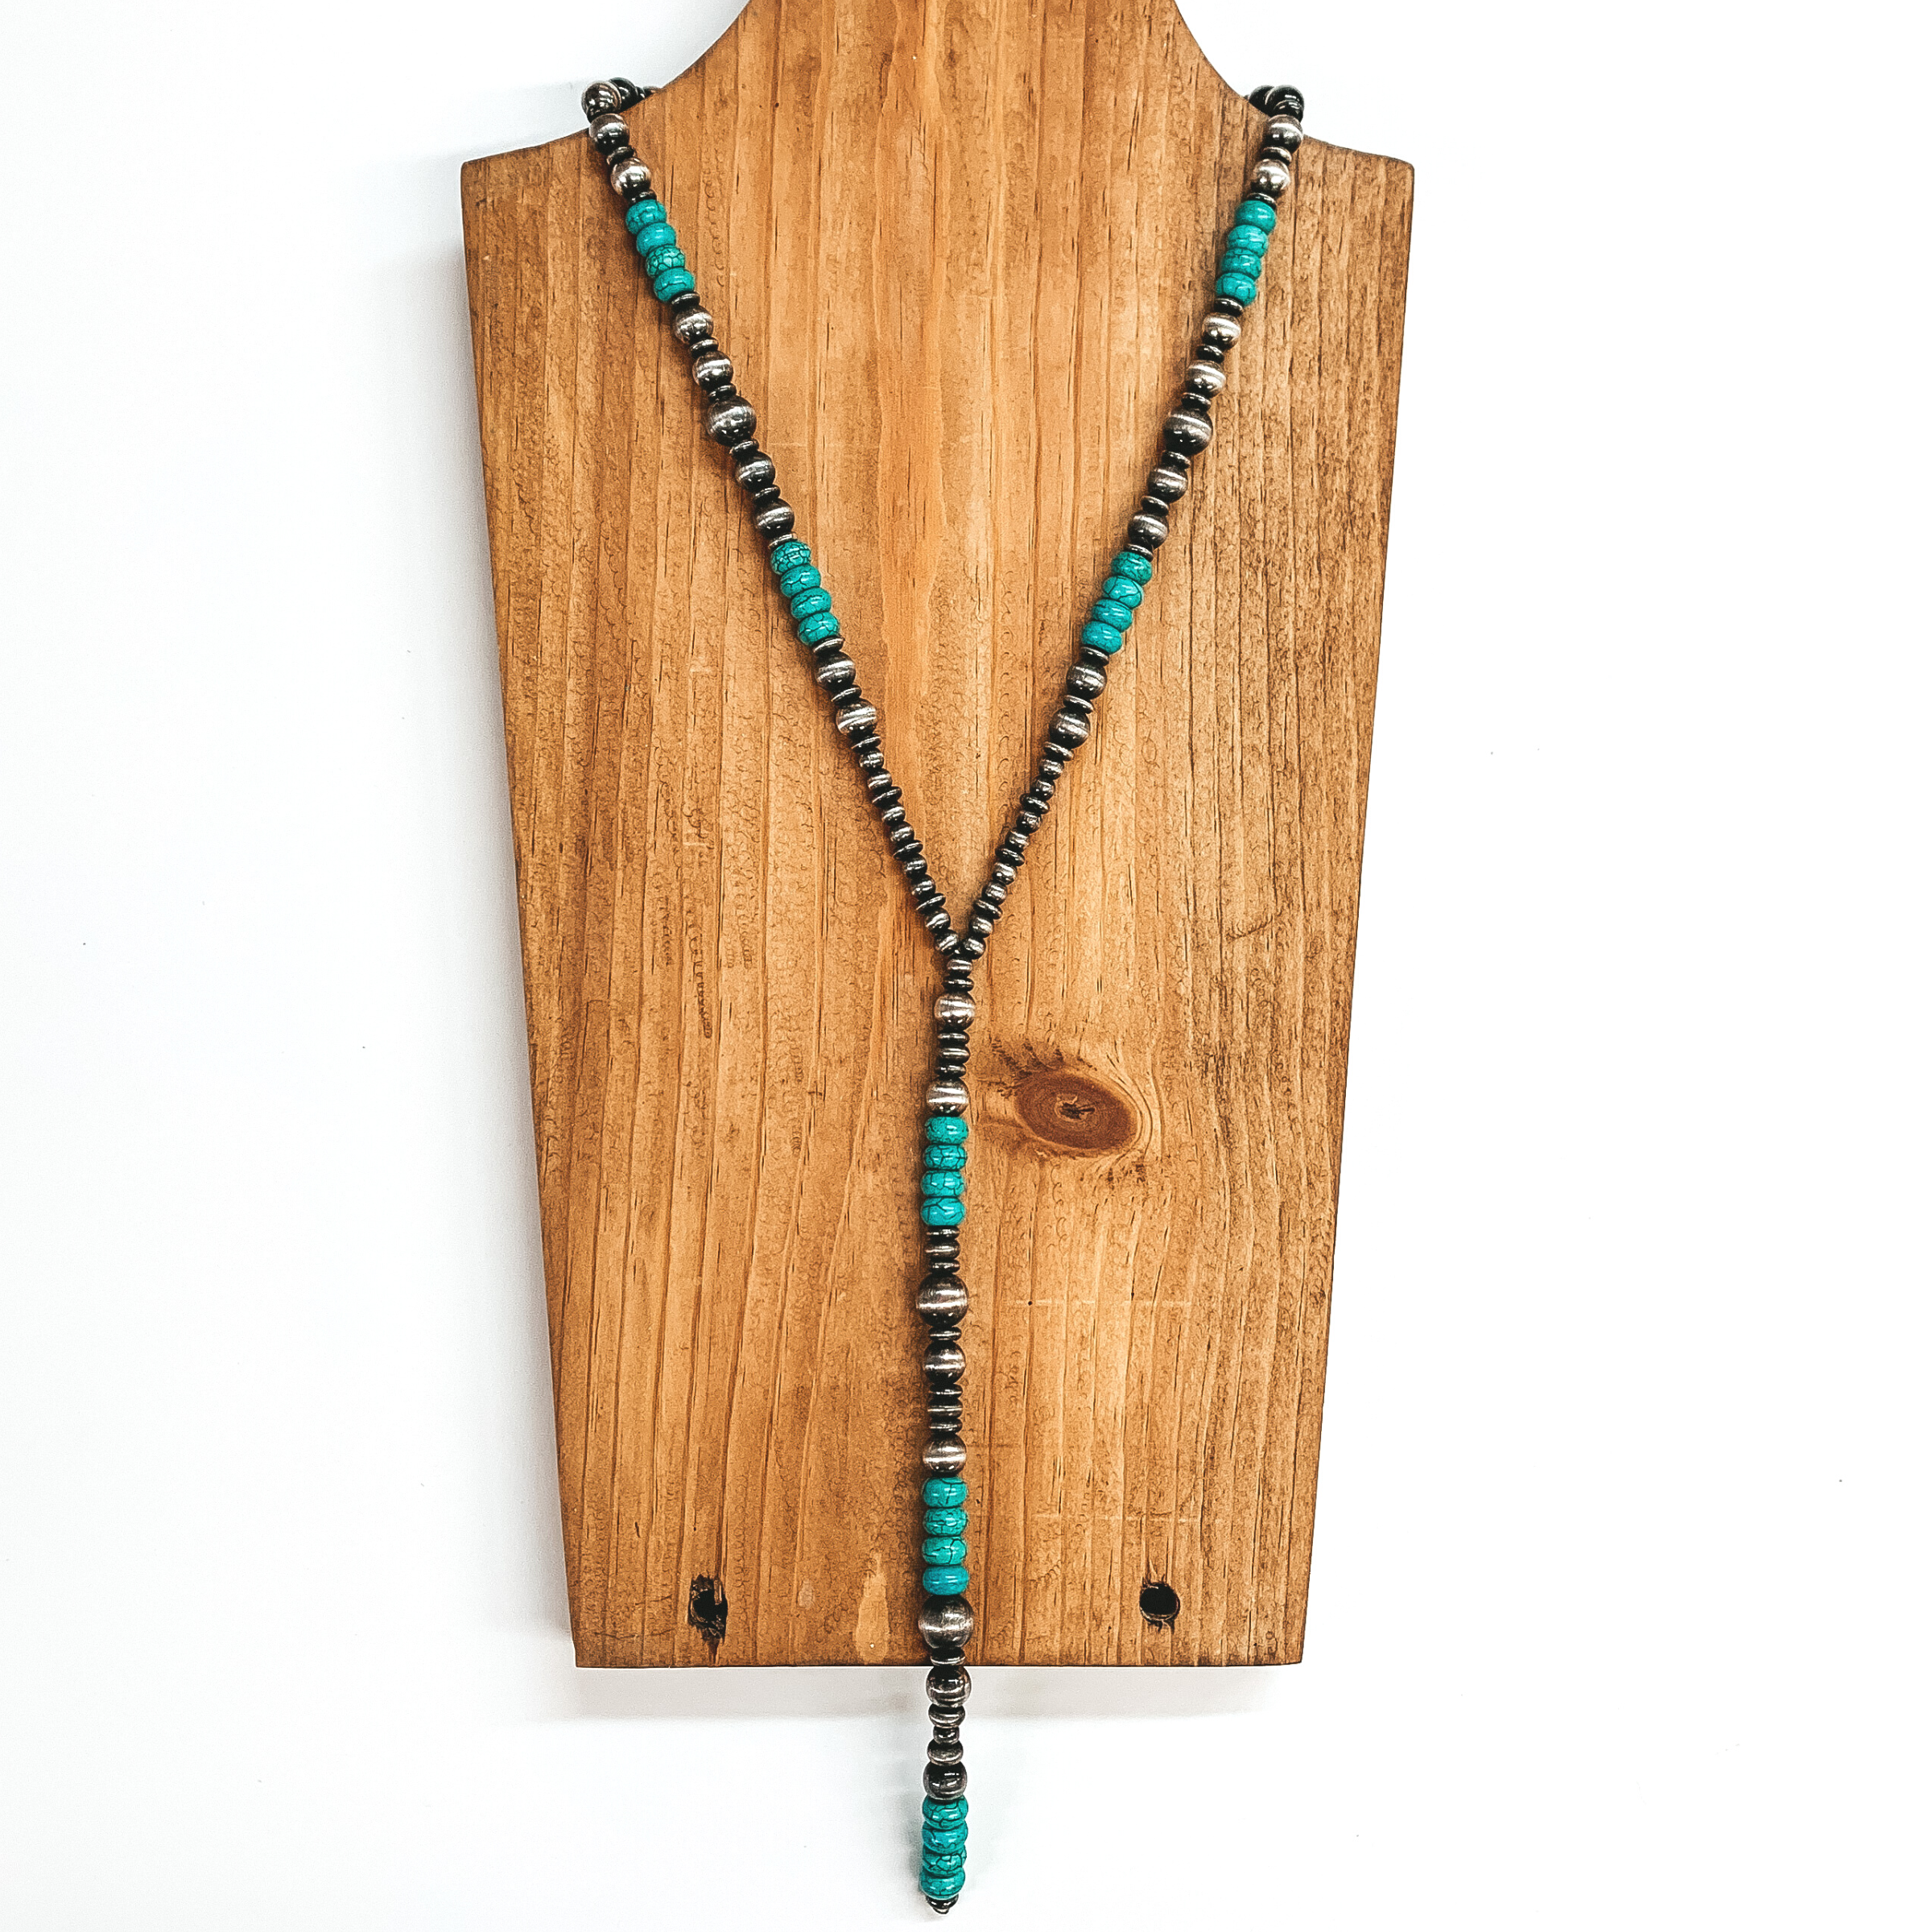 Silver and turquoise beaded necklace with a long beaded drop. The silver beads have different sizes of beads, while the turquoise beads are the space size and used as spacers. This necklace is pictured on a wood necklace holder on a white background. 